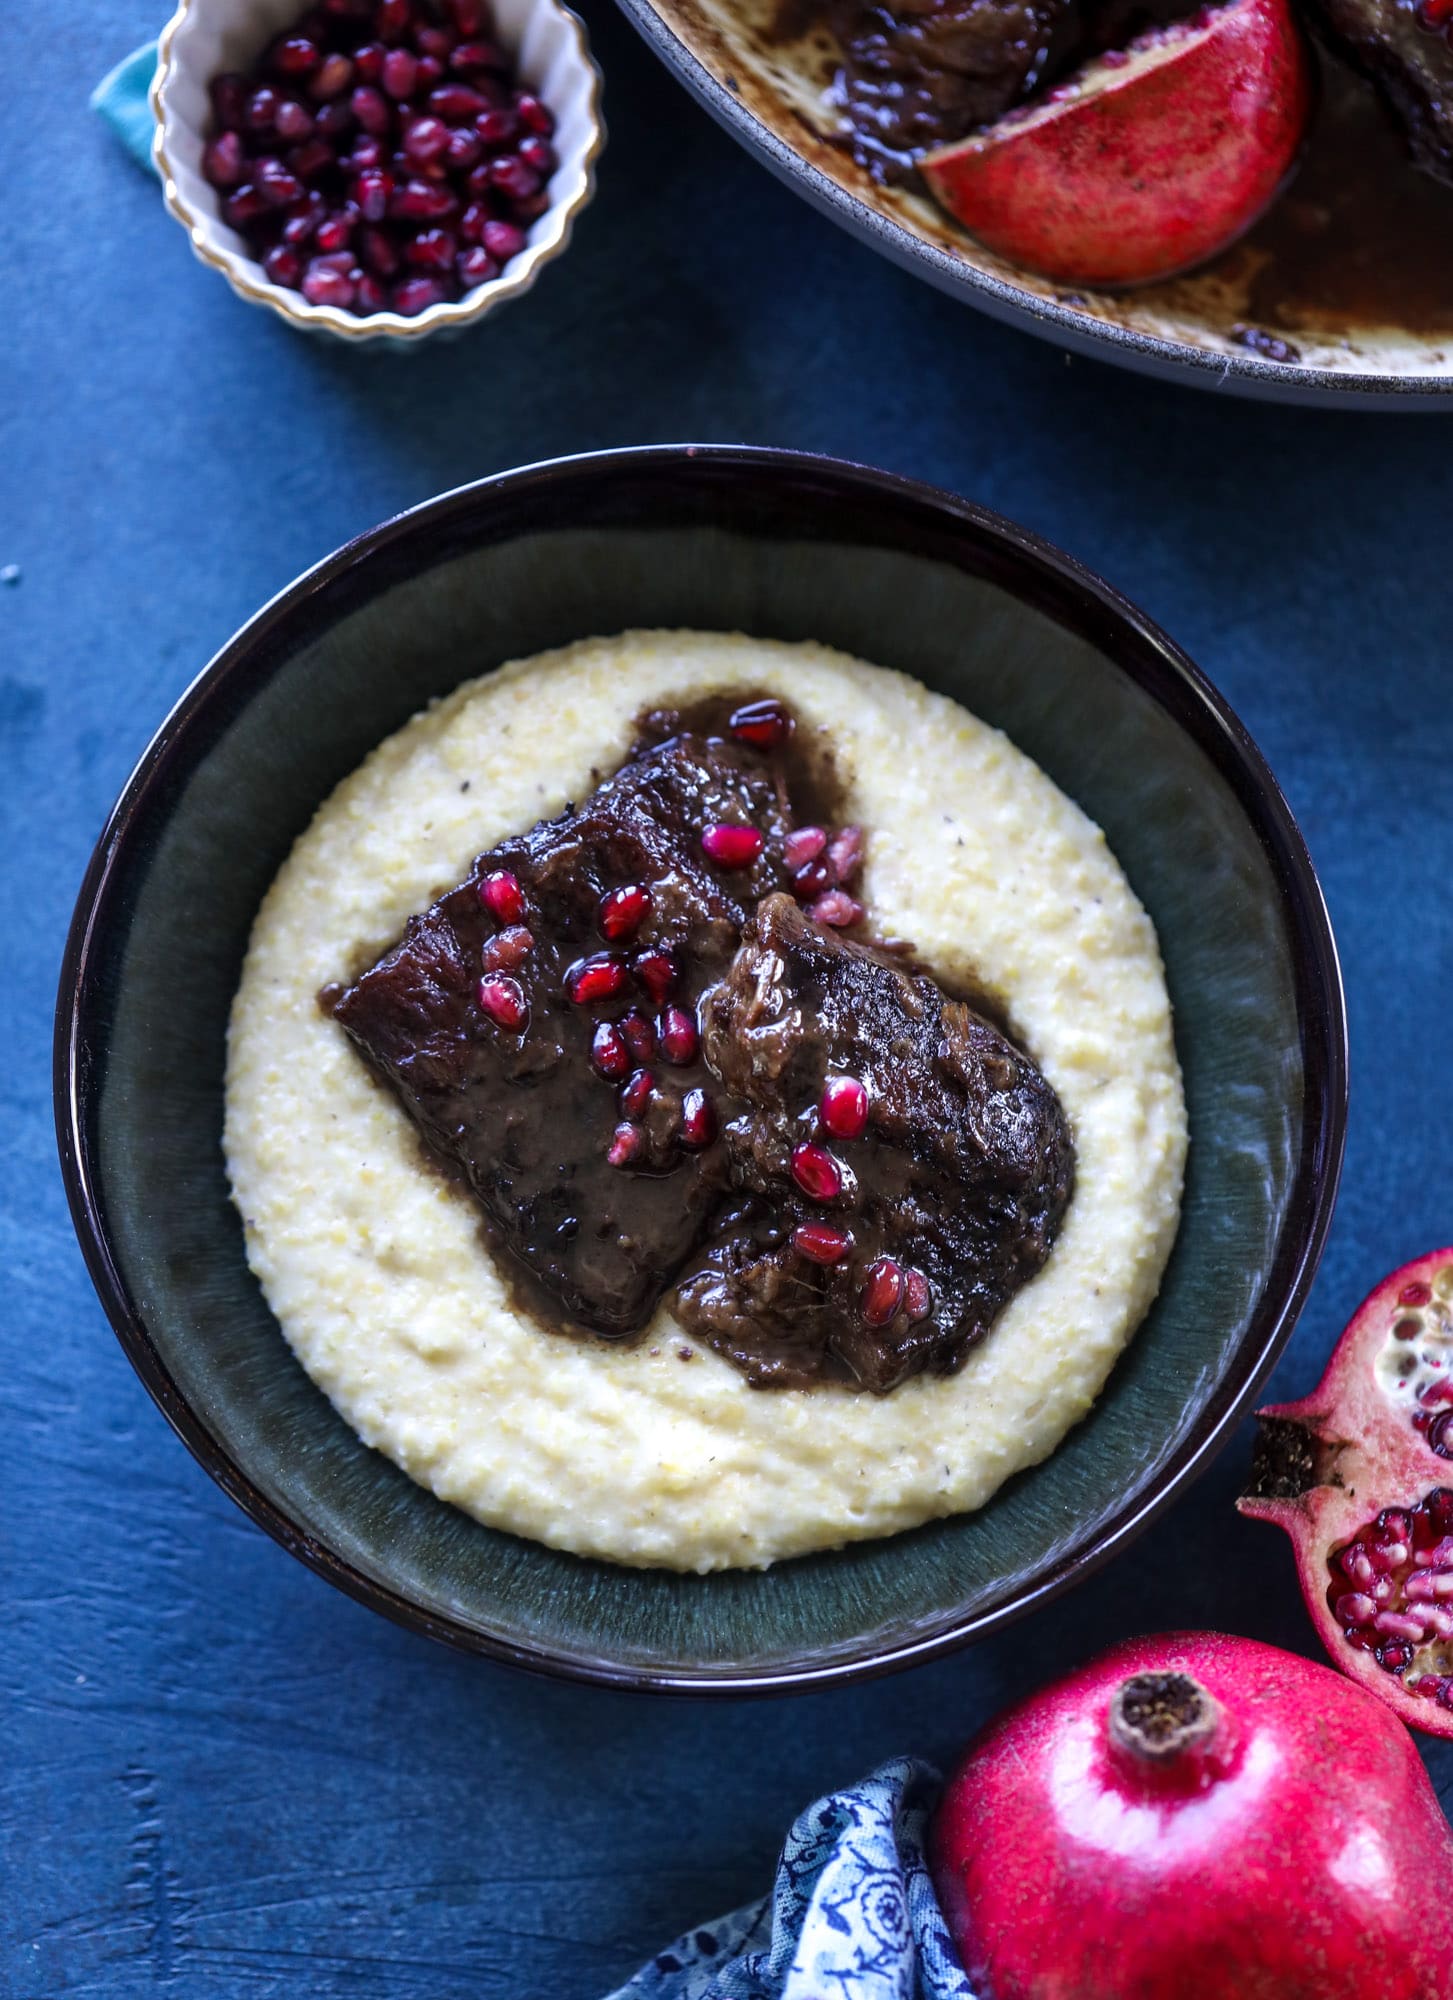 These pomegranate braised short ribs are an incredible take on comfort food! Pomegranate juice and molasses are the base of the recipe and after braising, you're left with tender, juicy and flavorful beef that is amazing served with polenta, potatoes or even in tacos. I howsweeteats.com #braised #shortribs